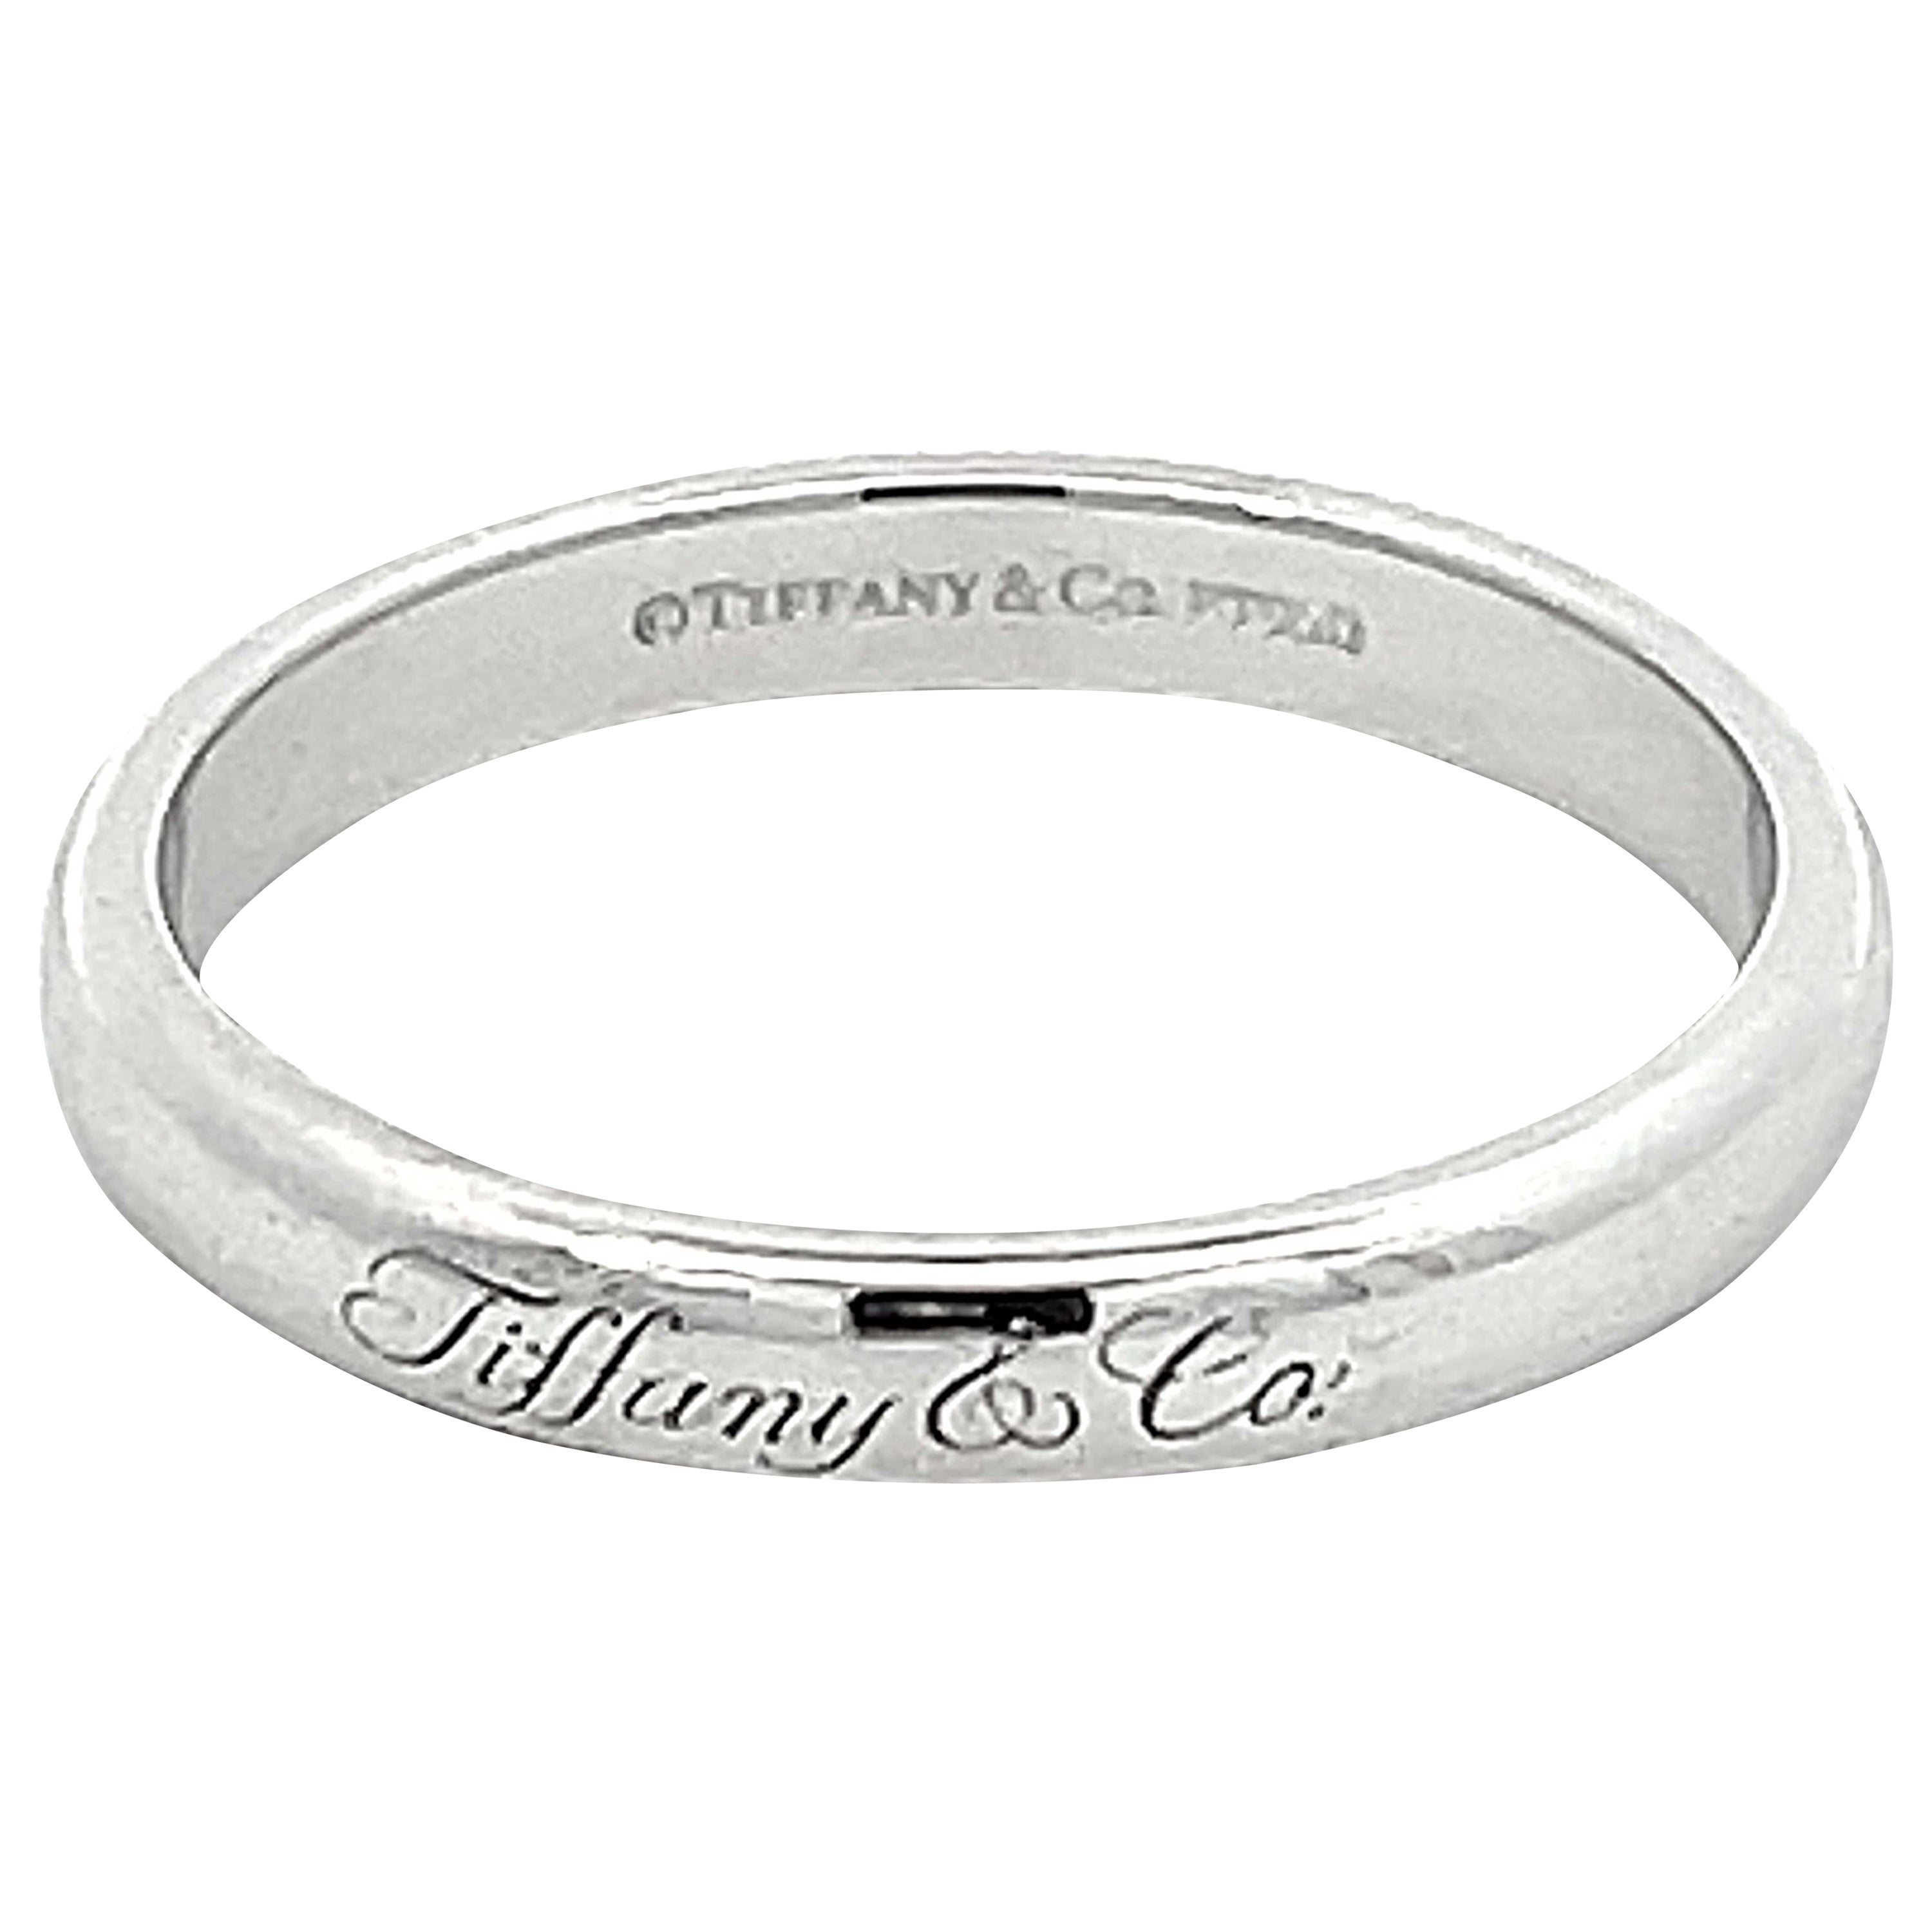 Vintage Tiffany & Co. Wedding Band Ring in Platinum For Sale